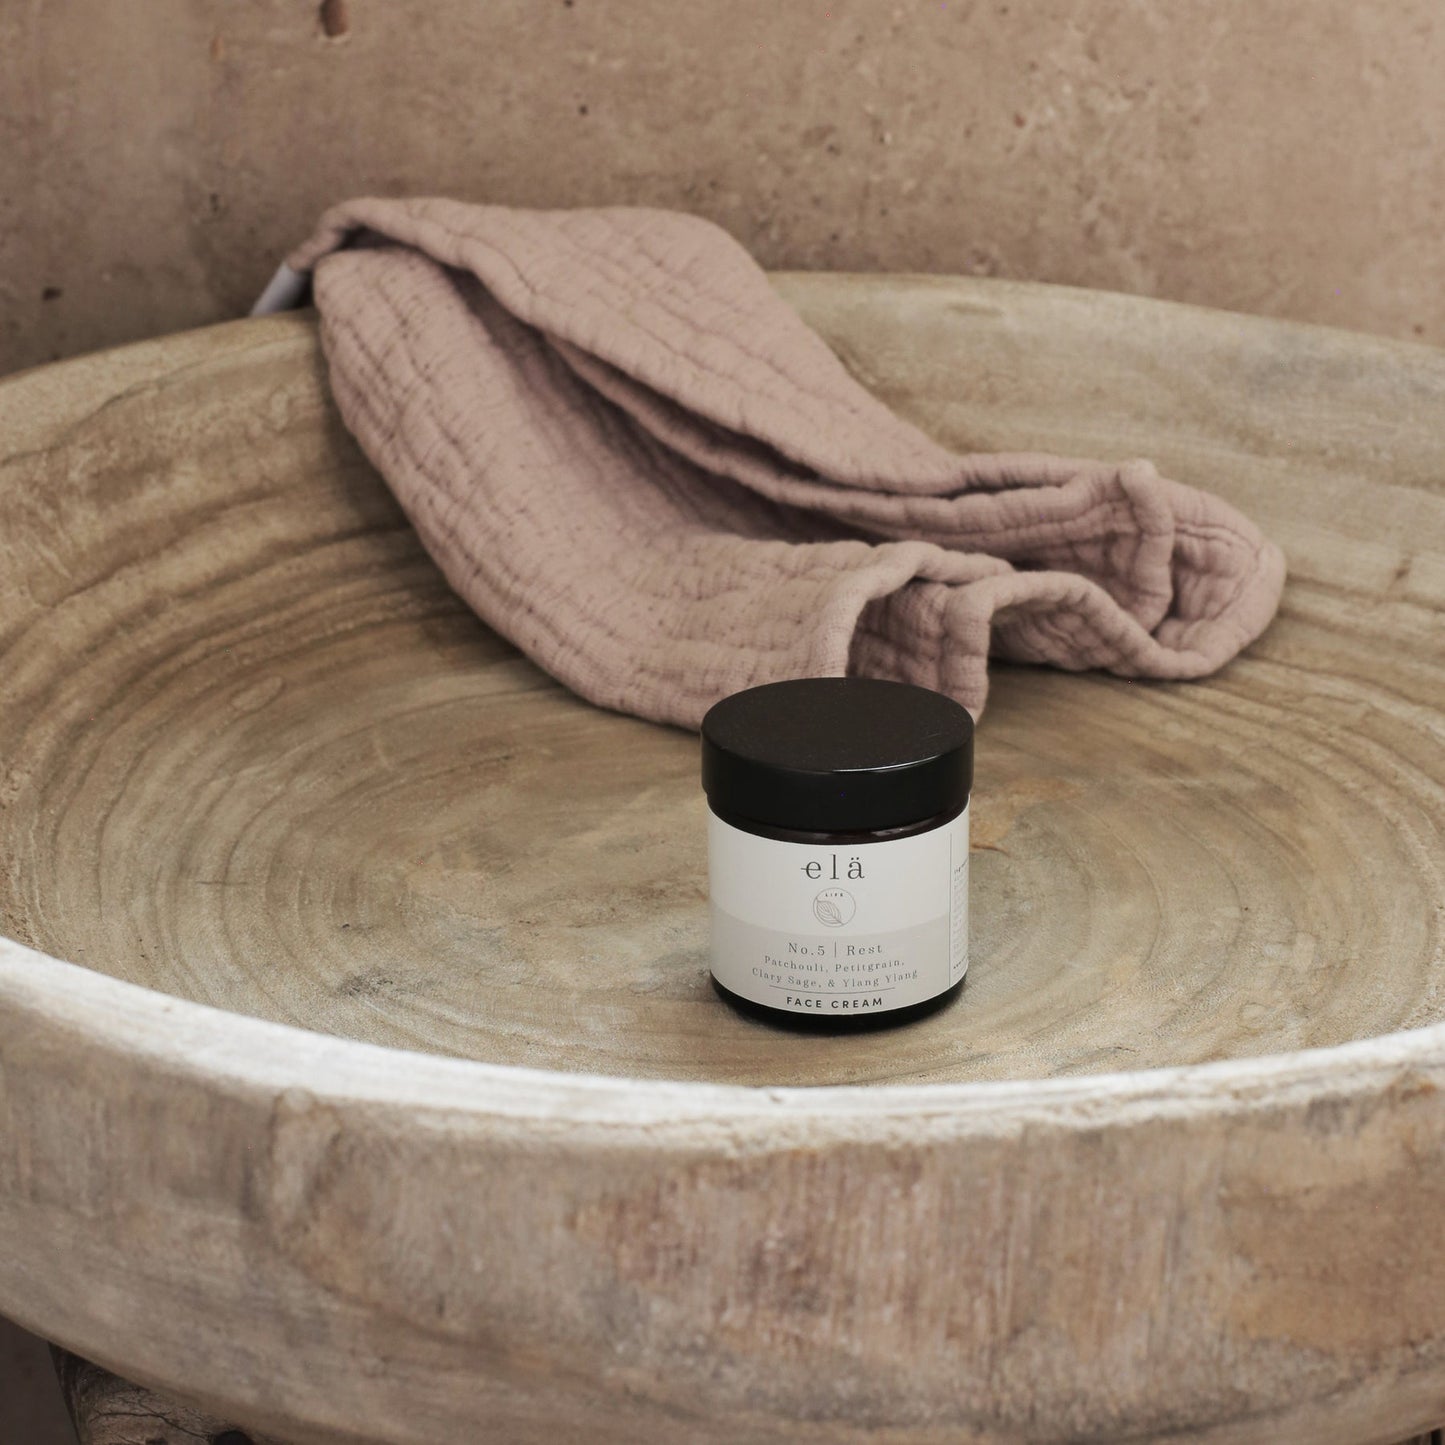 Elä Life deeply moisturising and rehydrating Rest No 5 face cream is made from natural ingredients and their Rest blend of Clary Sage, Ylang Ylang, Petitgrain and Patchouli 100% Essential Oils. 